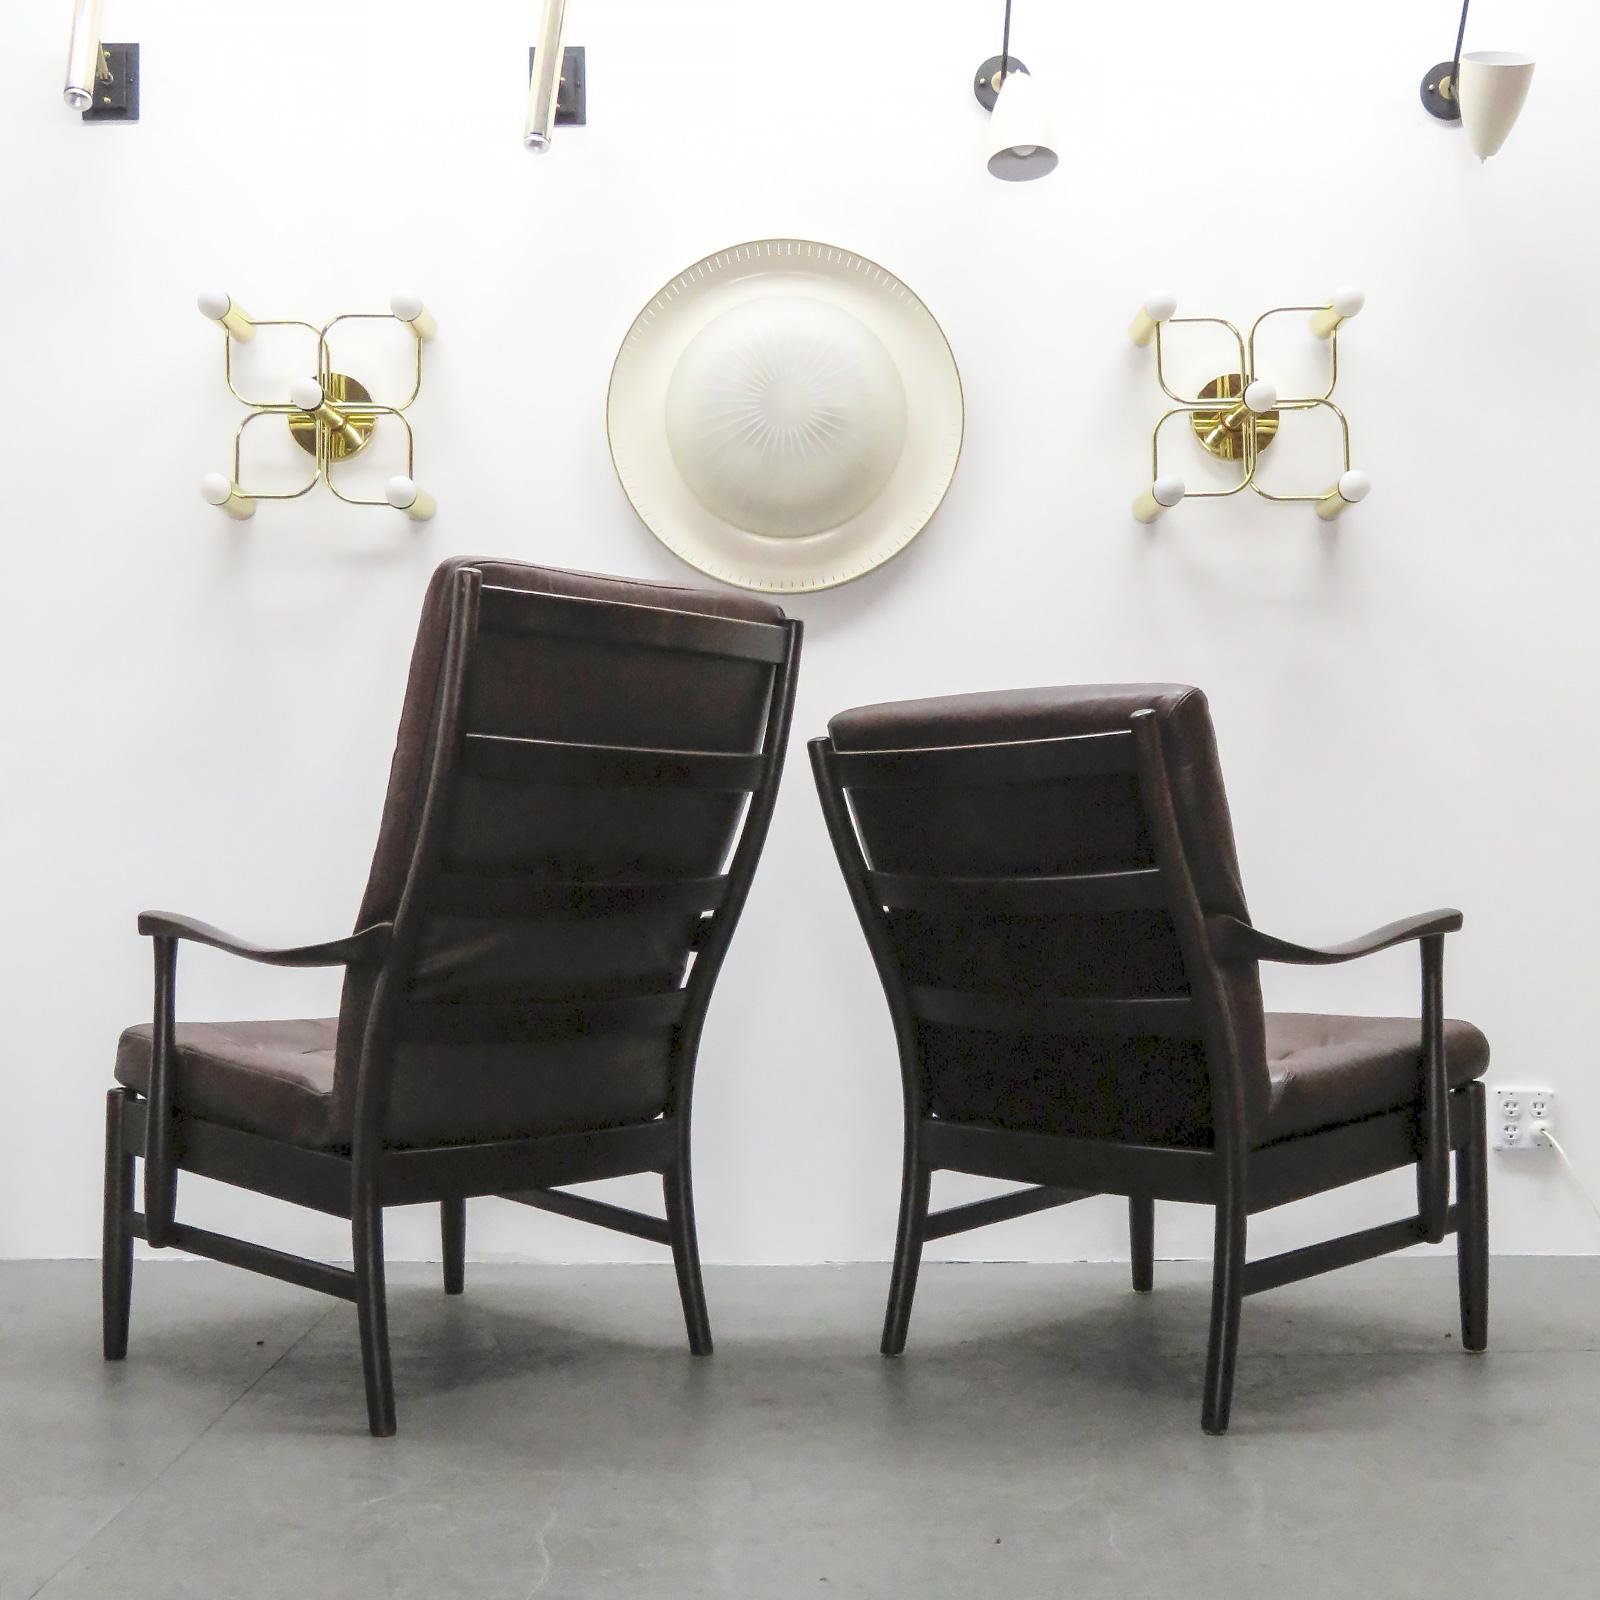 Mid-20th Century Set of Two Danish Leather Side Chairs, 1950 For Sale